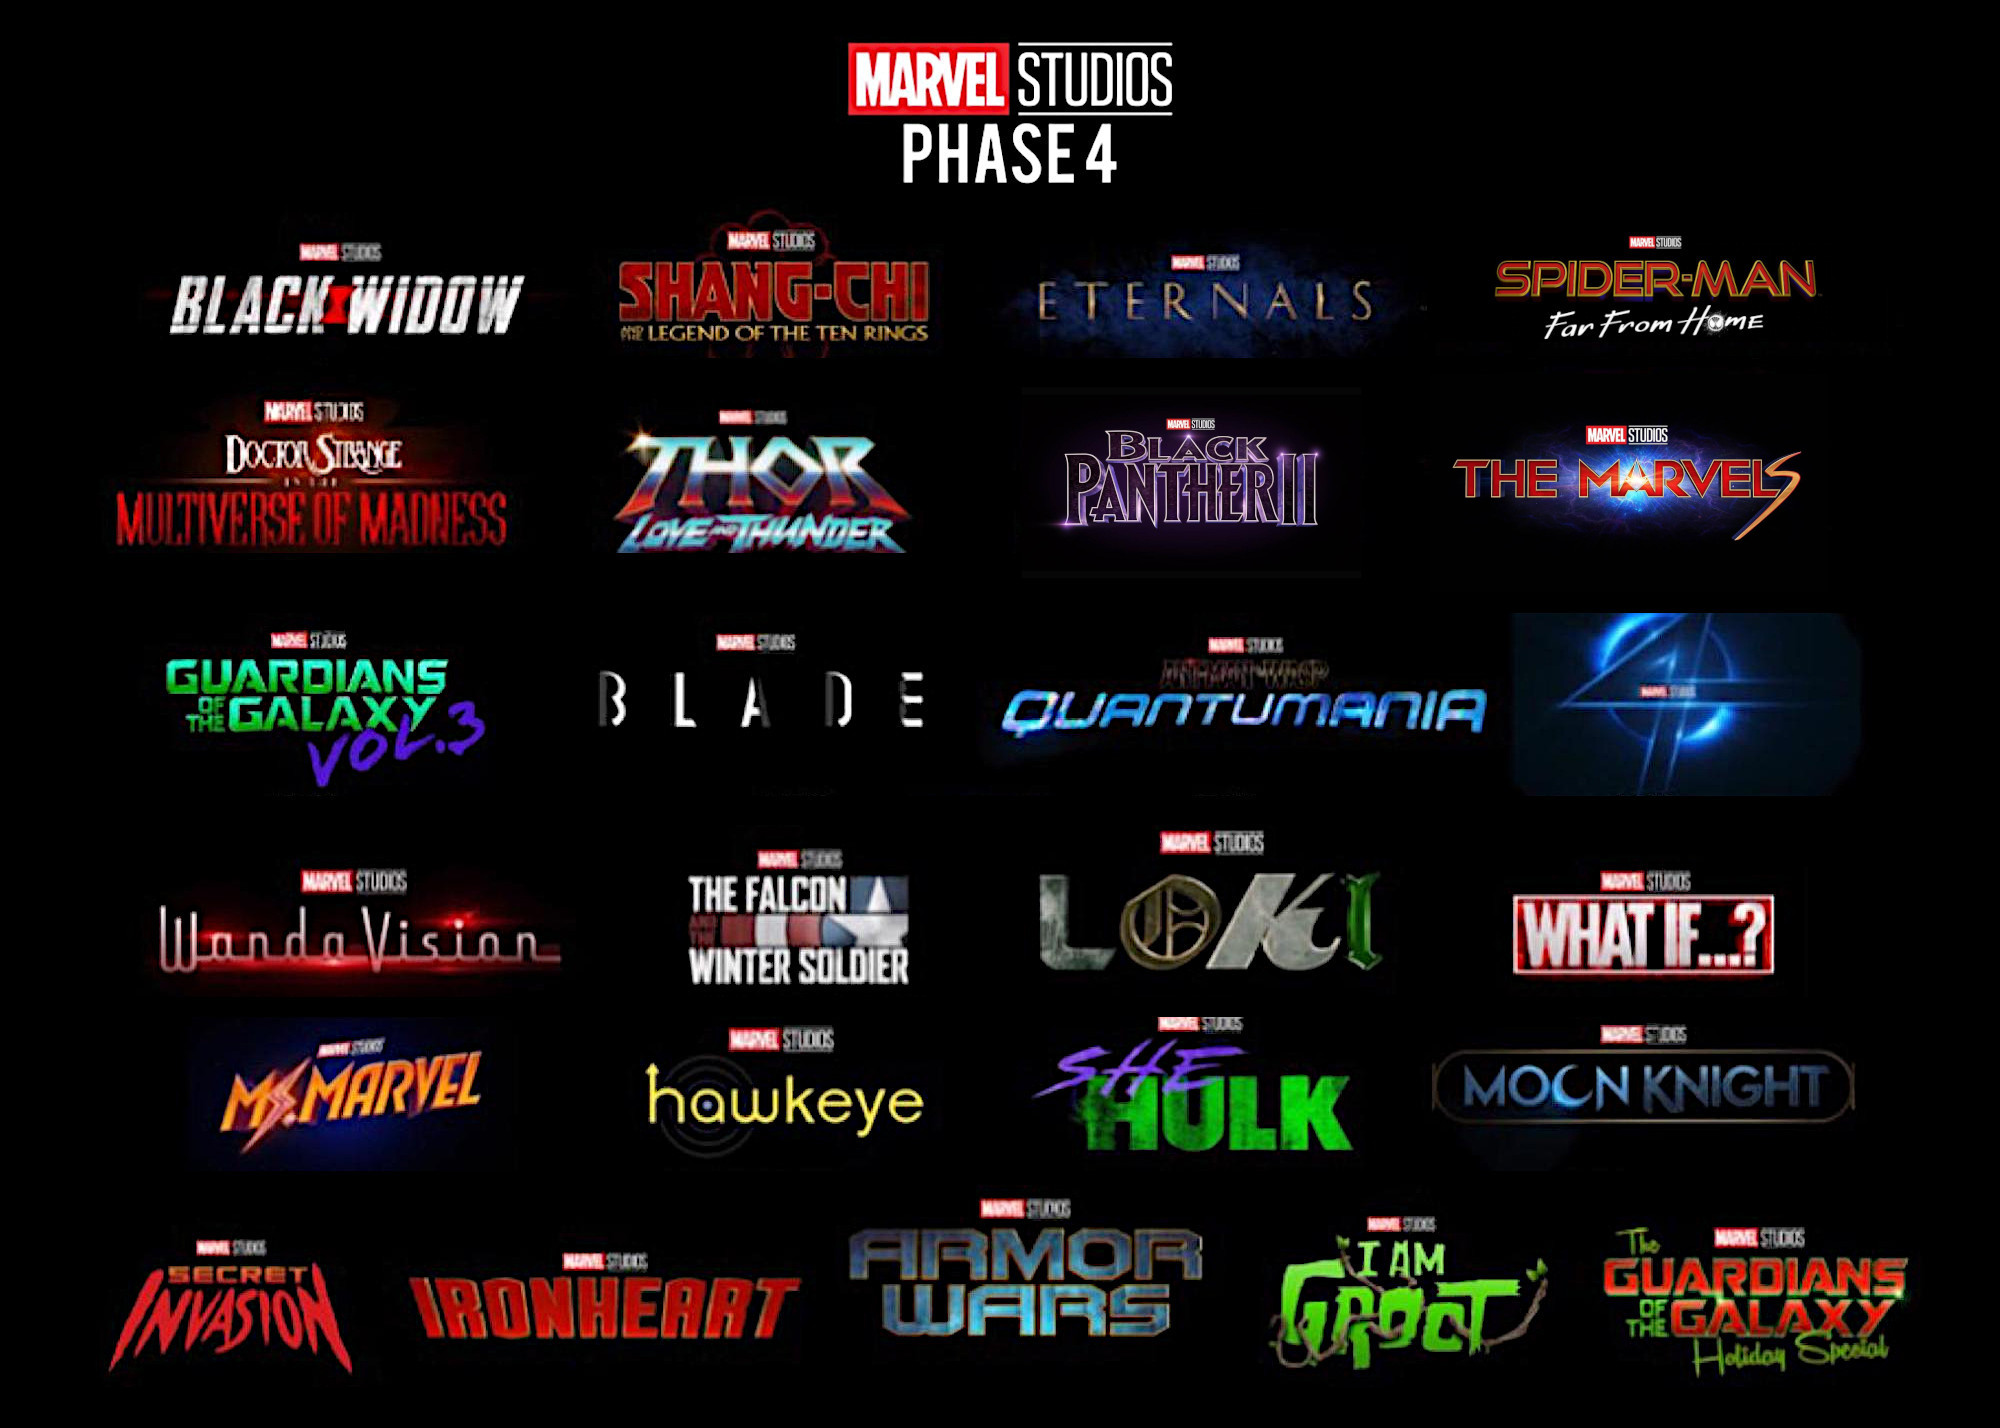 Thor: Love and Thunder is 'the MCU's best movie of Phase 4